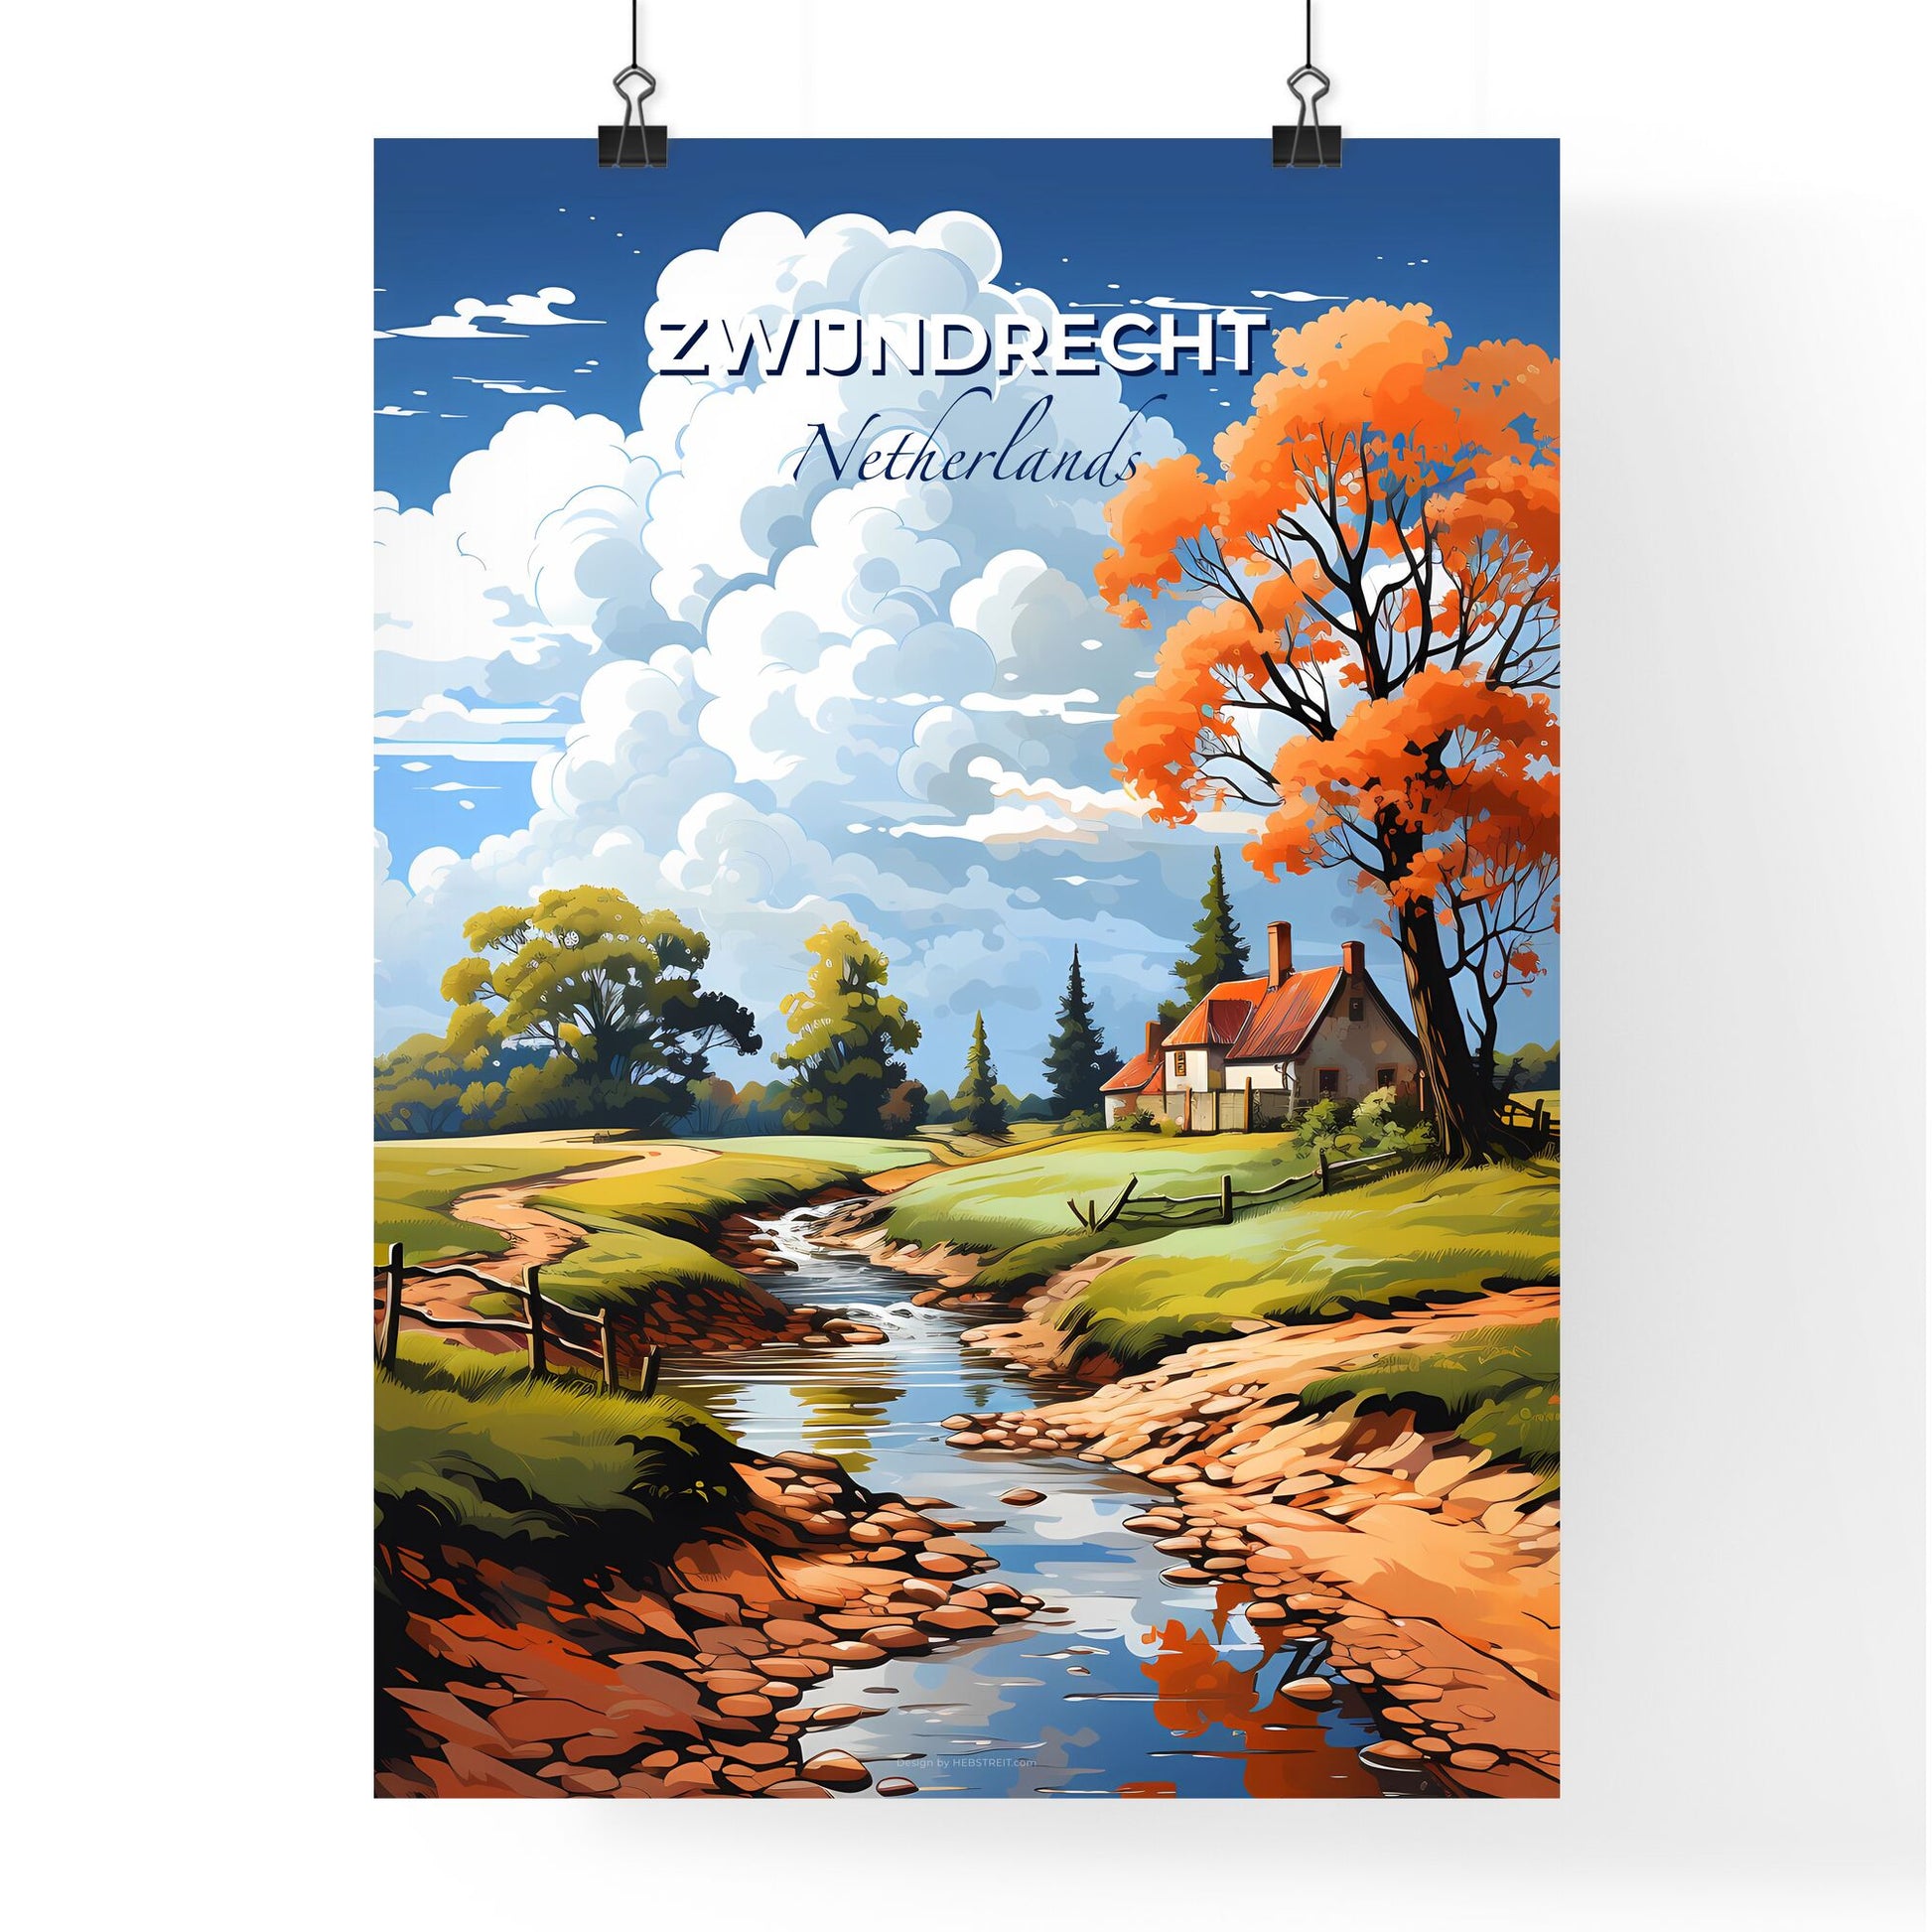 Zwijndrecht, Netherlands, A Poster of a stream running through a grassy field with a house and trees Default Title